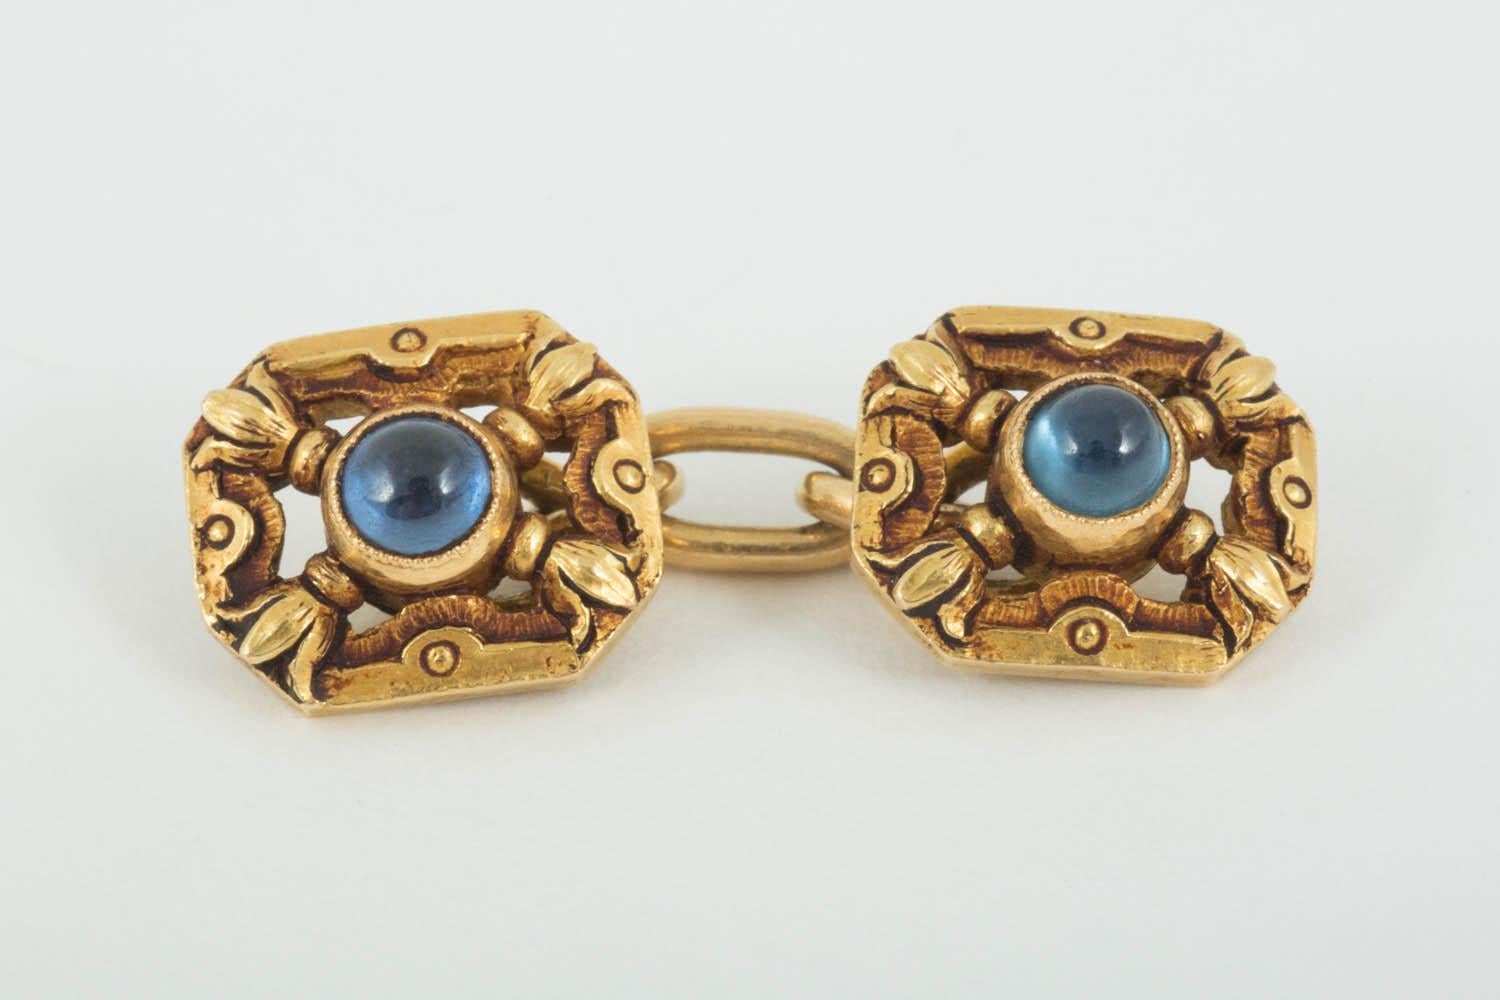 A heavy pair of 18 karat yellow gold cufflinks with floral carving, in an openwork form,each set with a cabochon cut sapphire centre,the goldwork of good colour.French marked withe the Eagles head.Circa 1900